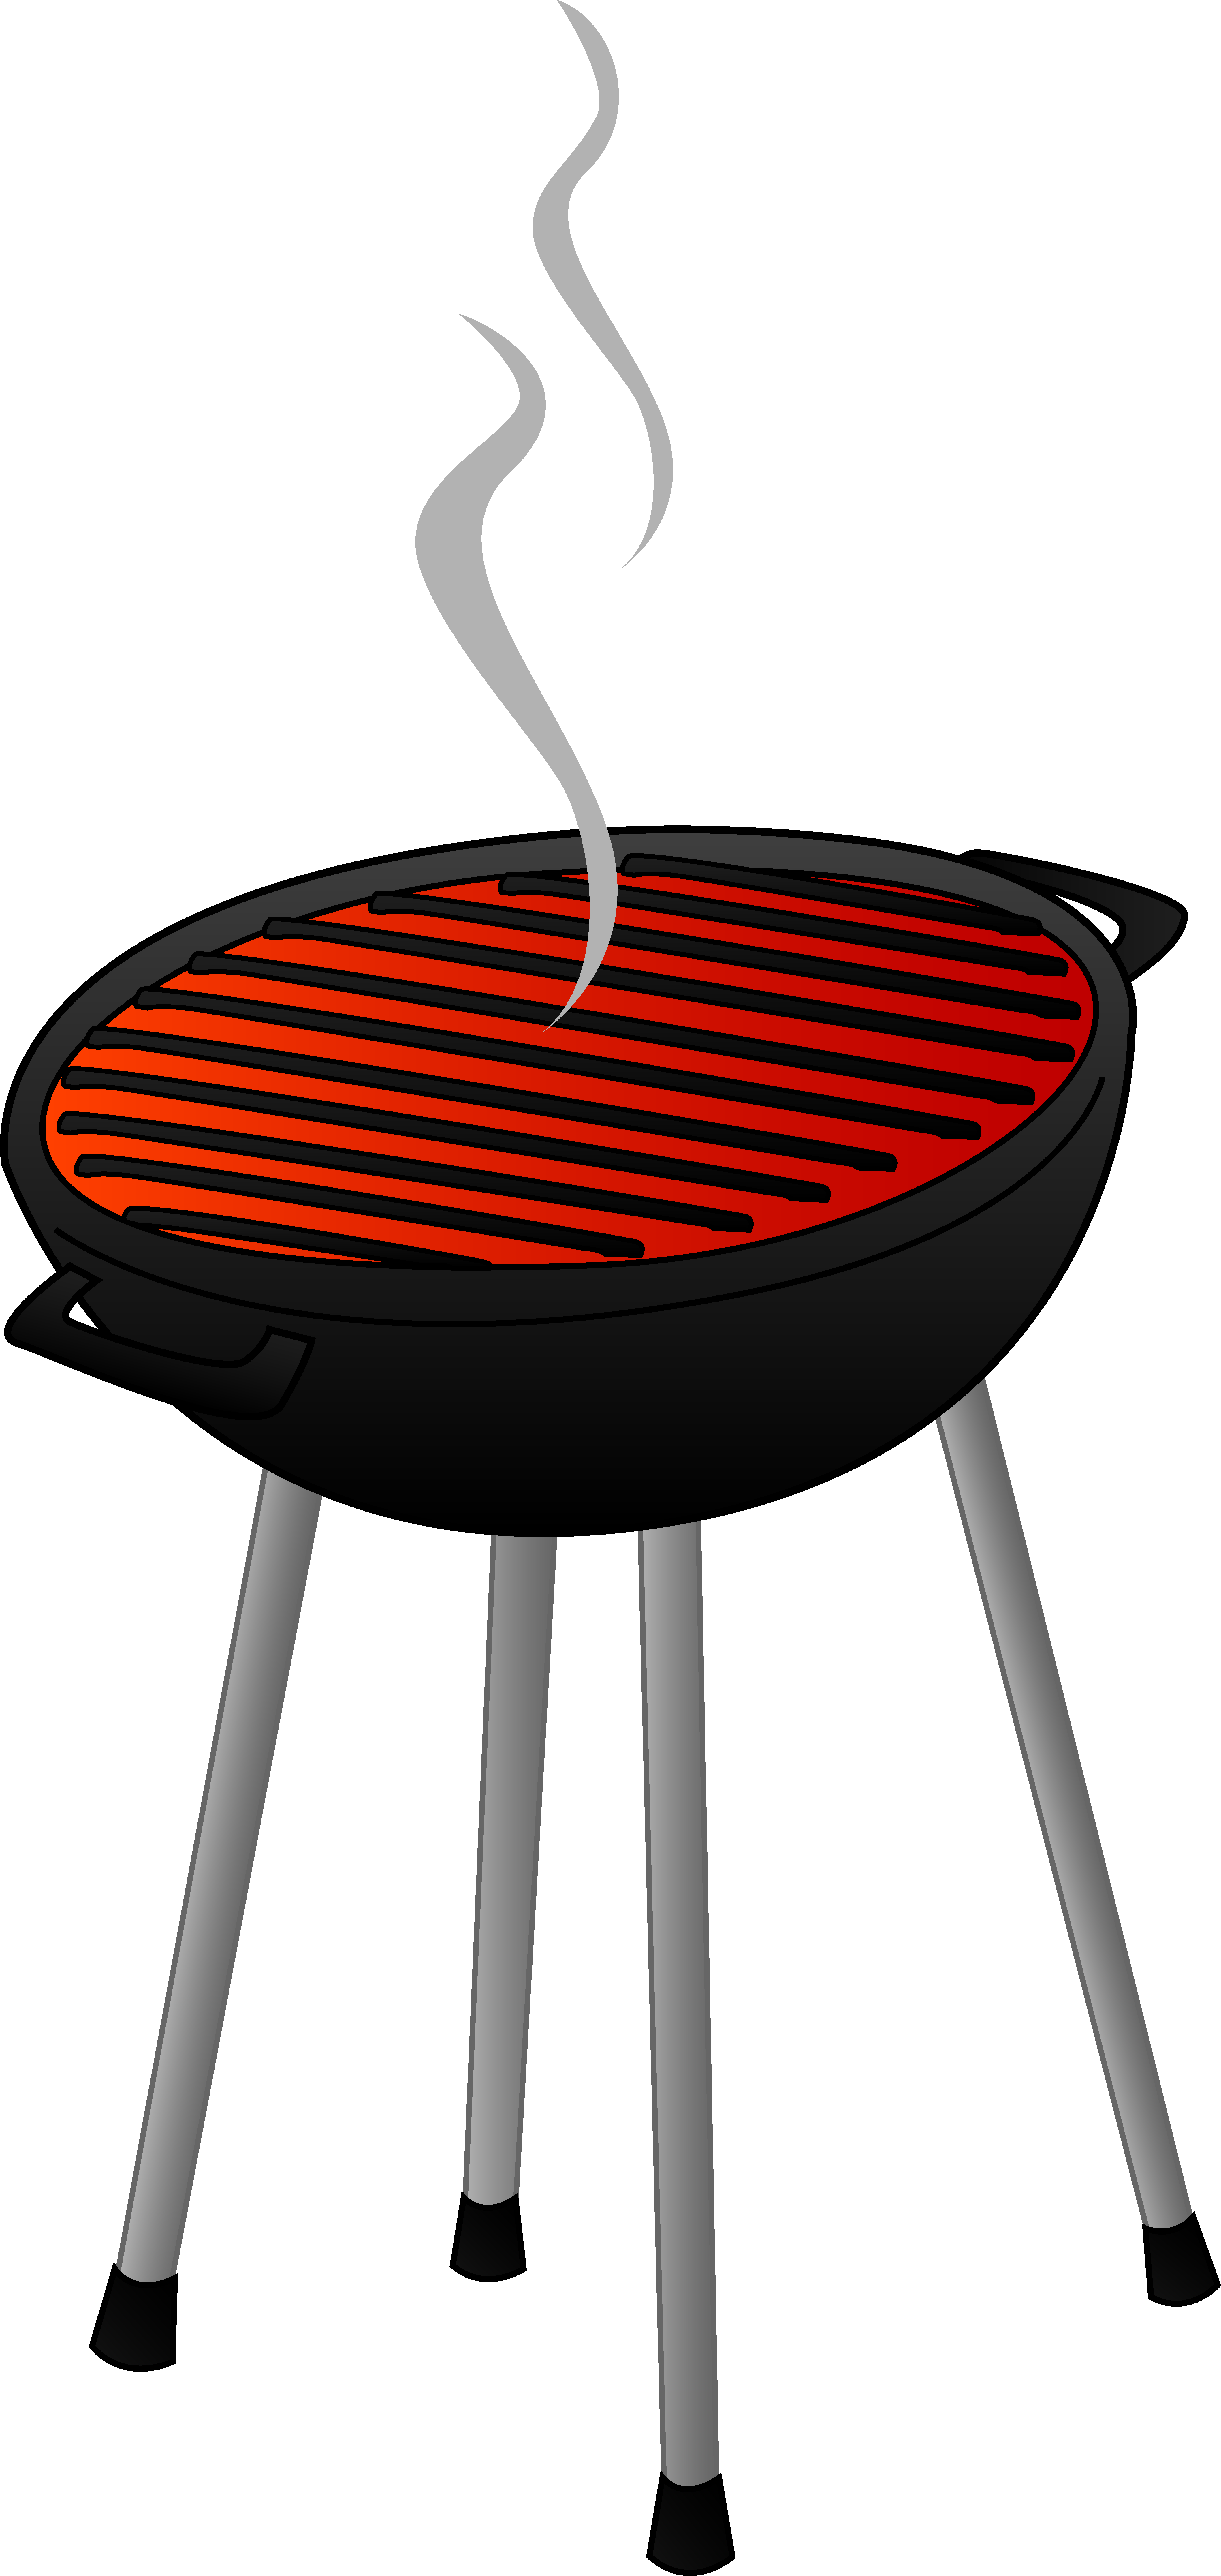 Grill Clip Art - Grill, Transparent background PNG HD thumbnail